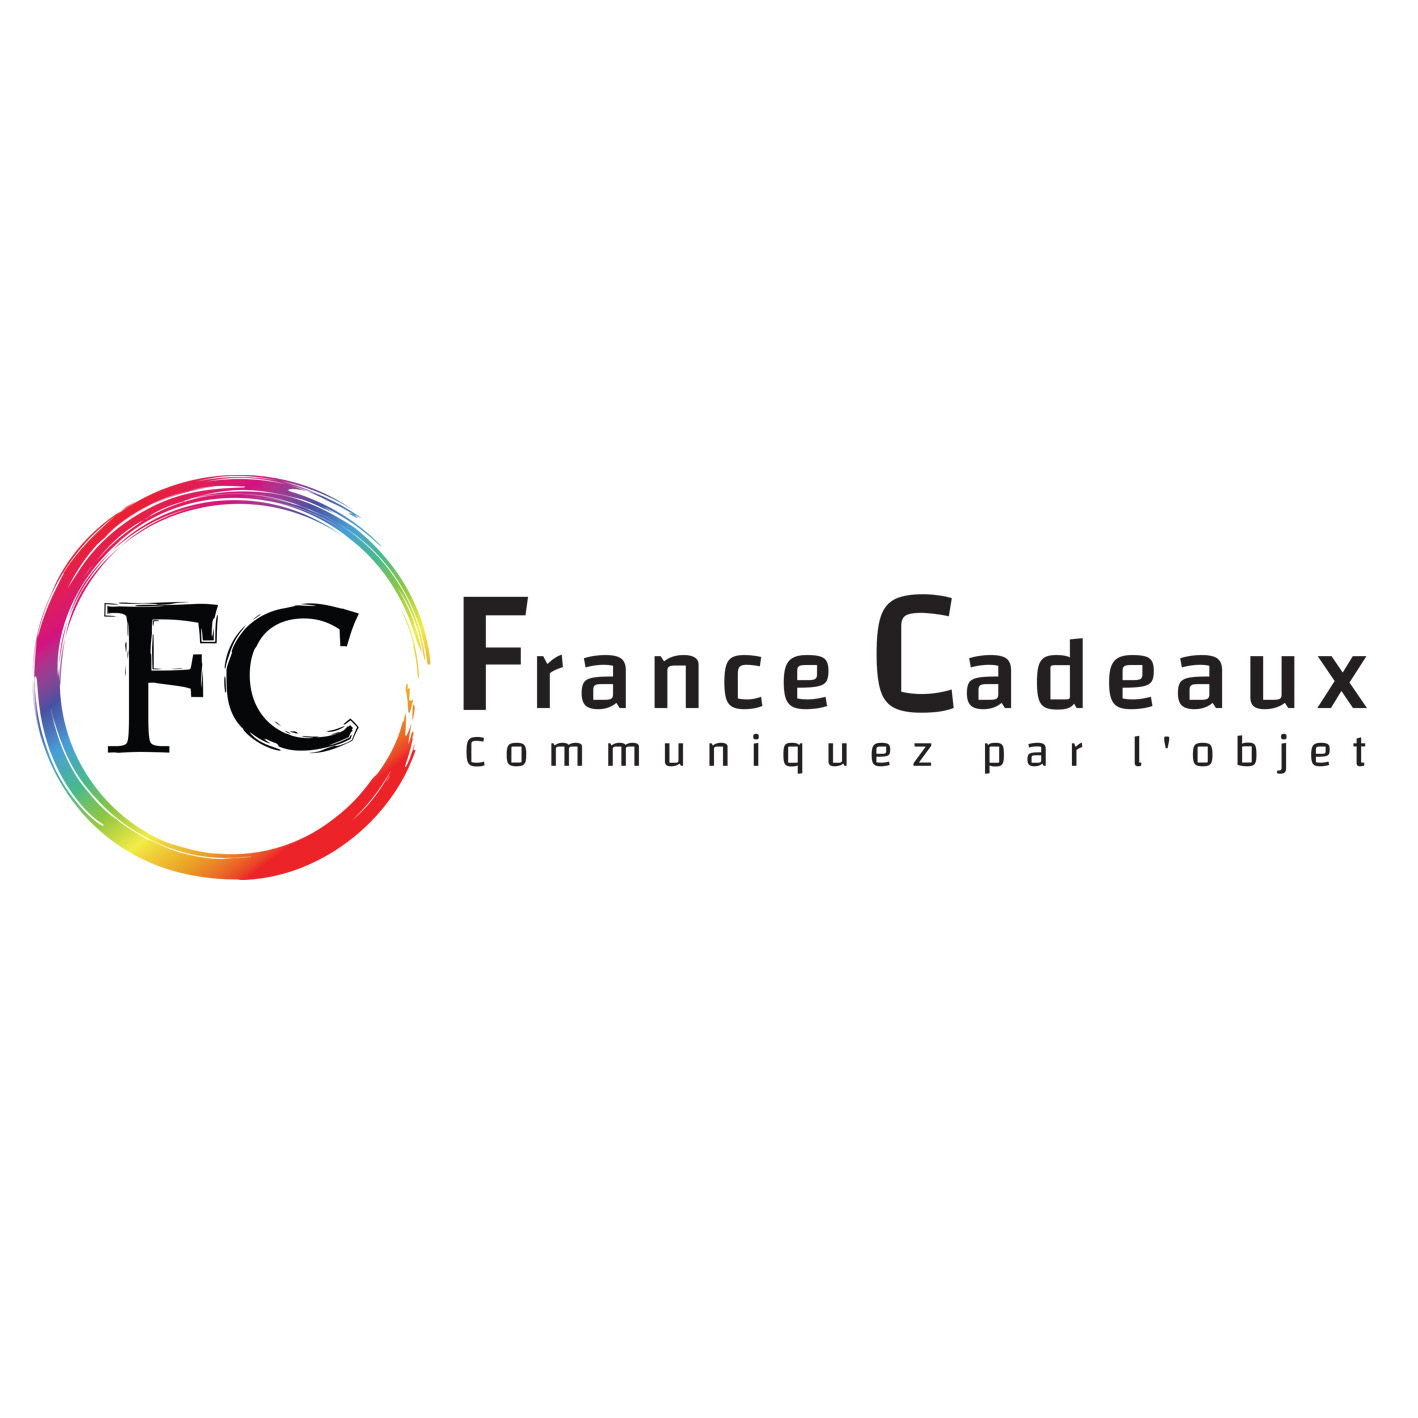 You are currently viewing France Cadeaux